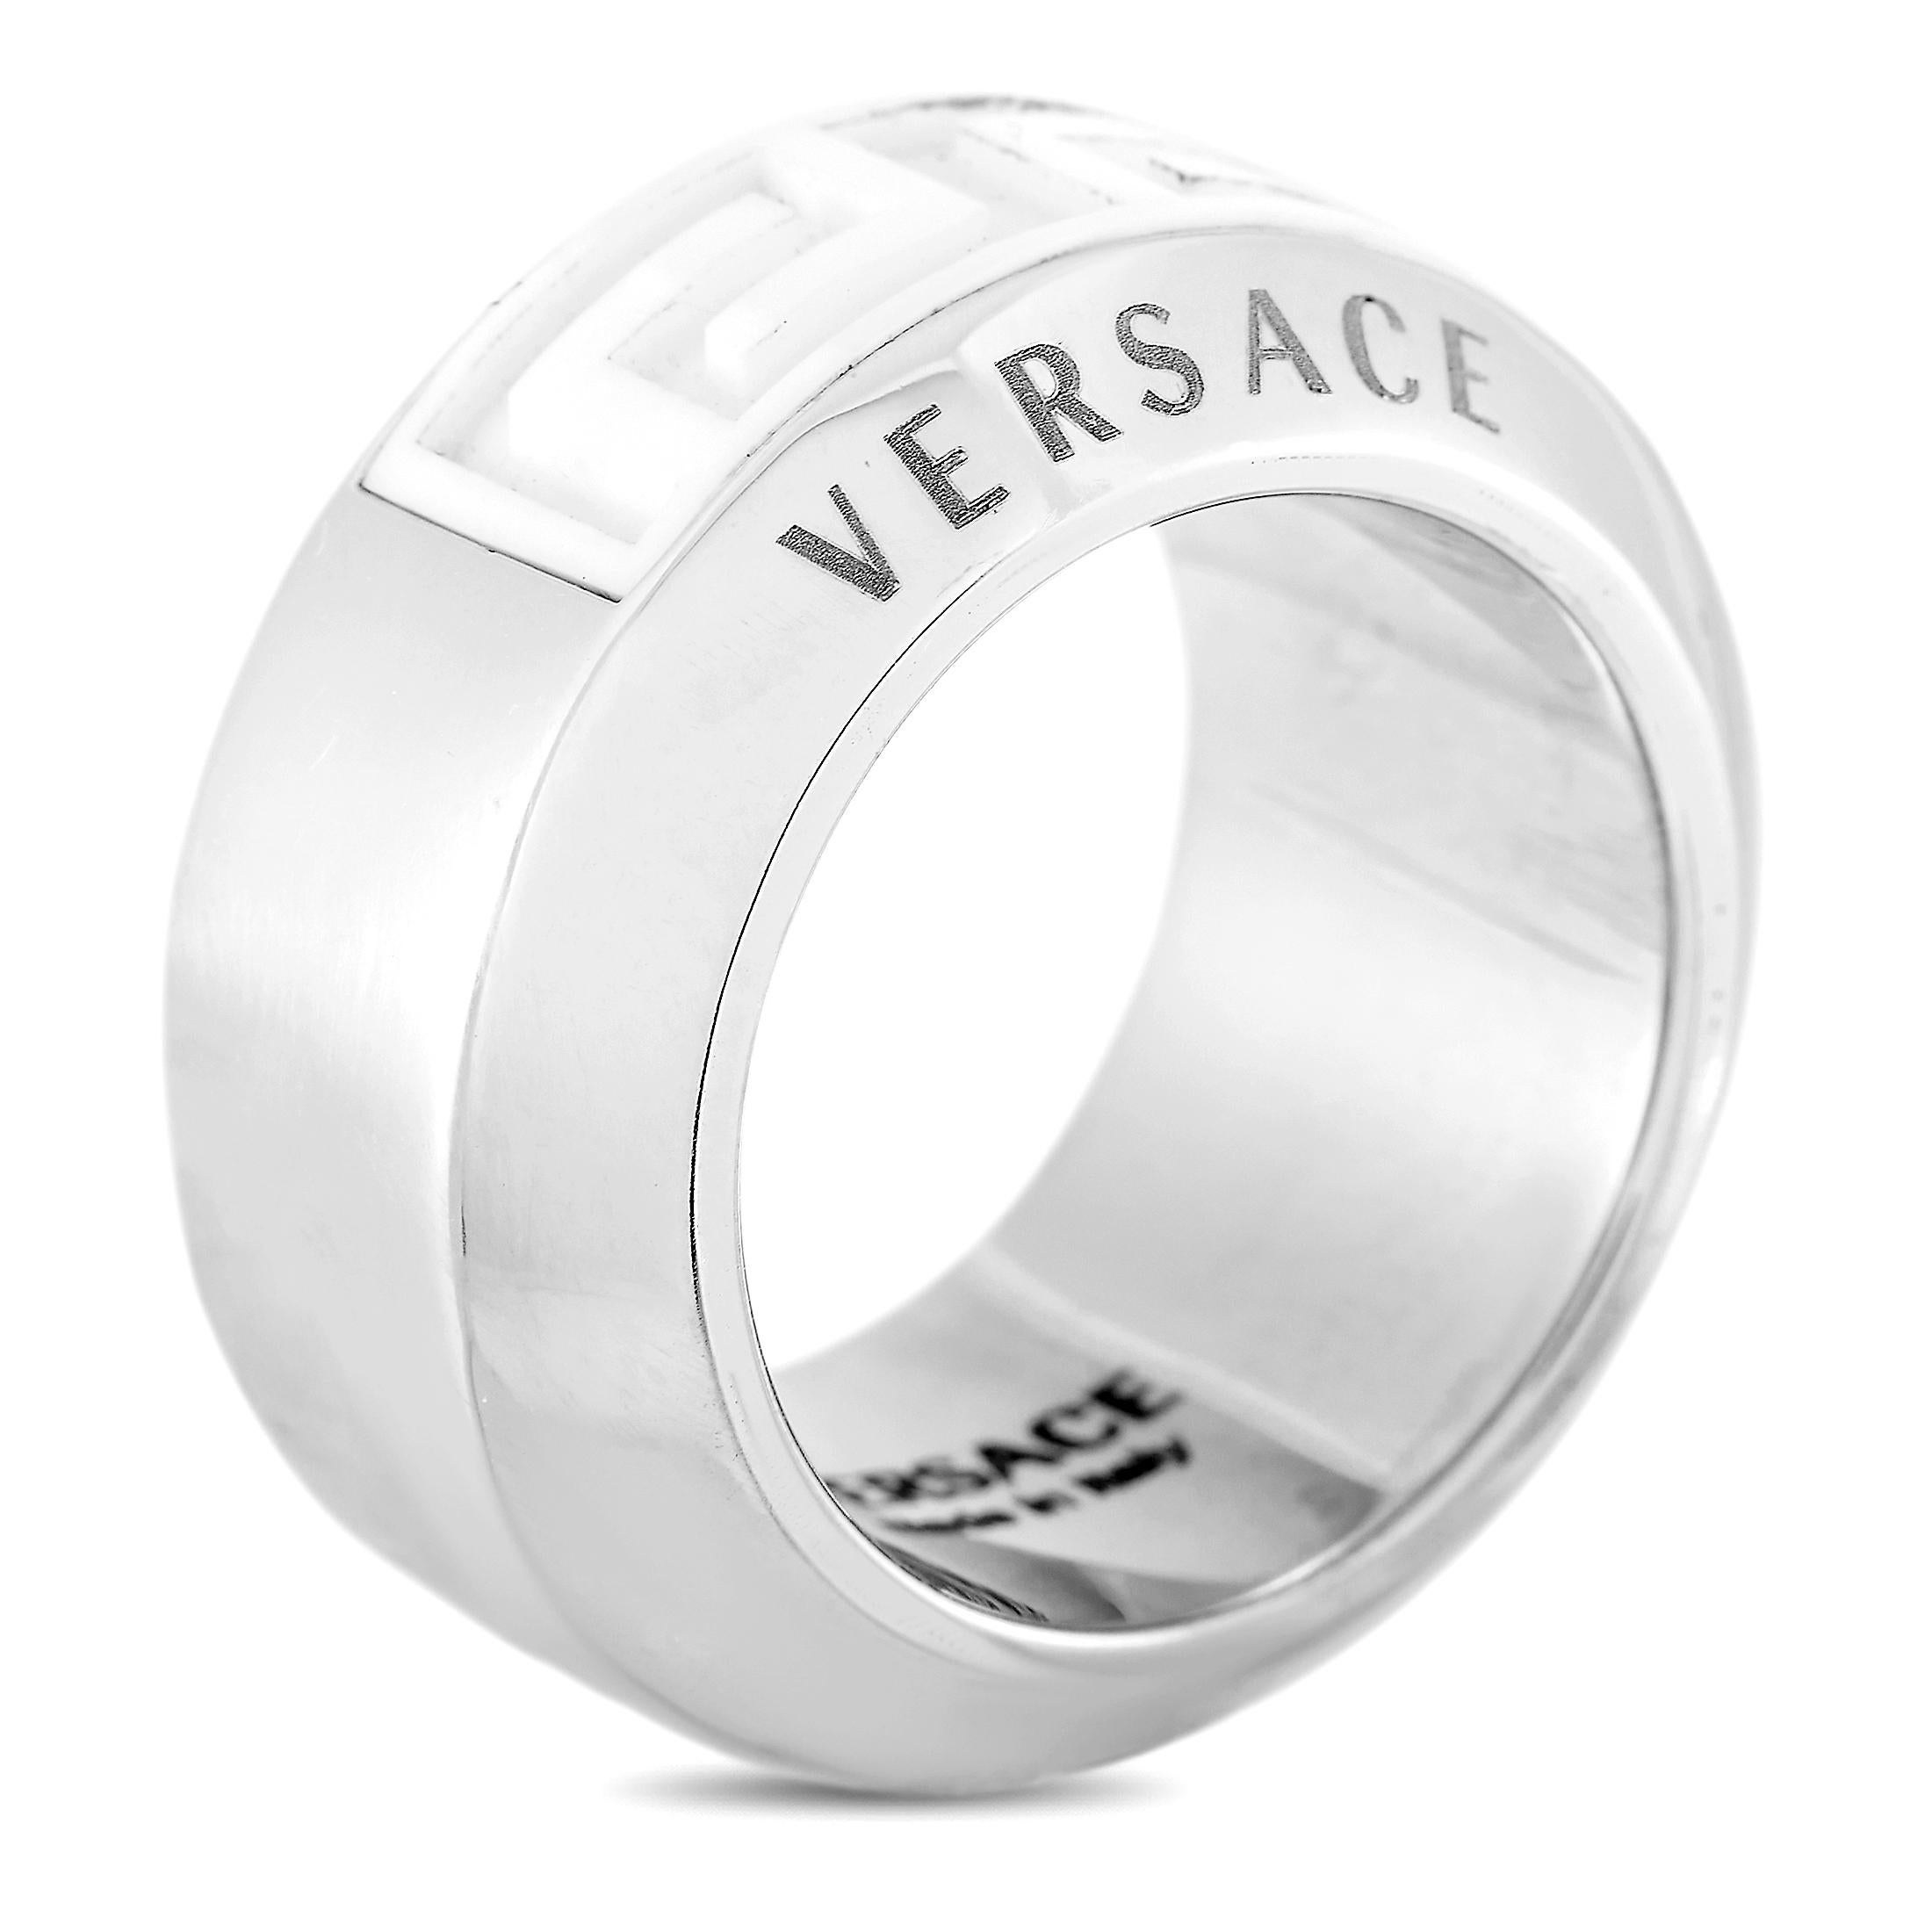 This Versace ring is made out of 18K white gold and ceramic and weighs 19.4 grams, boasting band thickness of 12 mm.
 
 The ring is offered in brand new condition and includes the manufacturer’s box.
